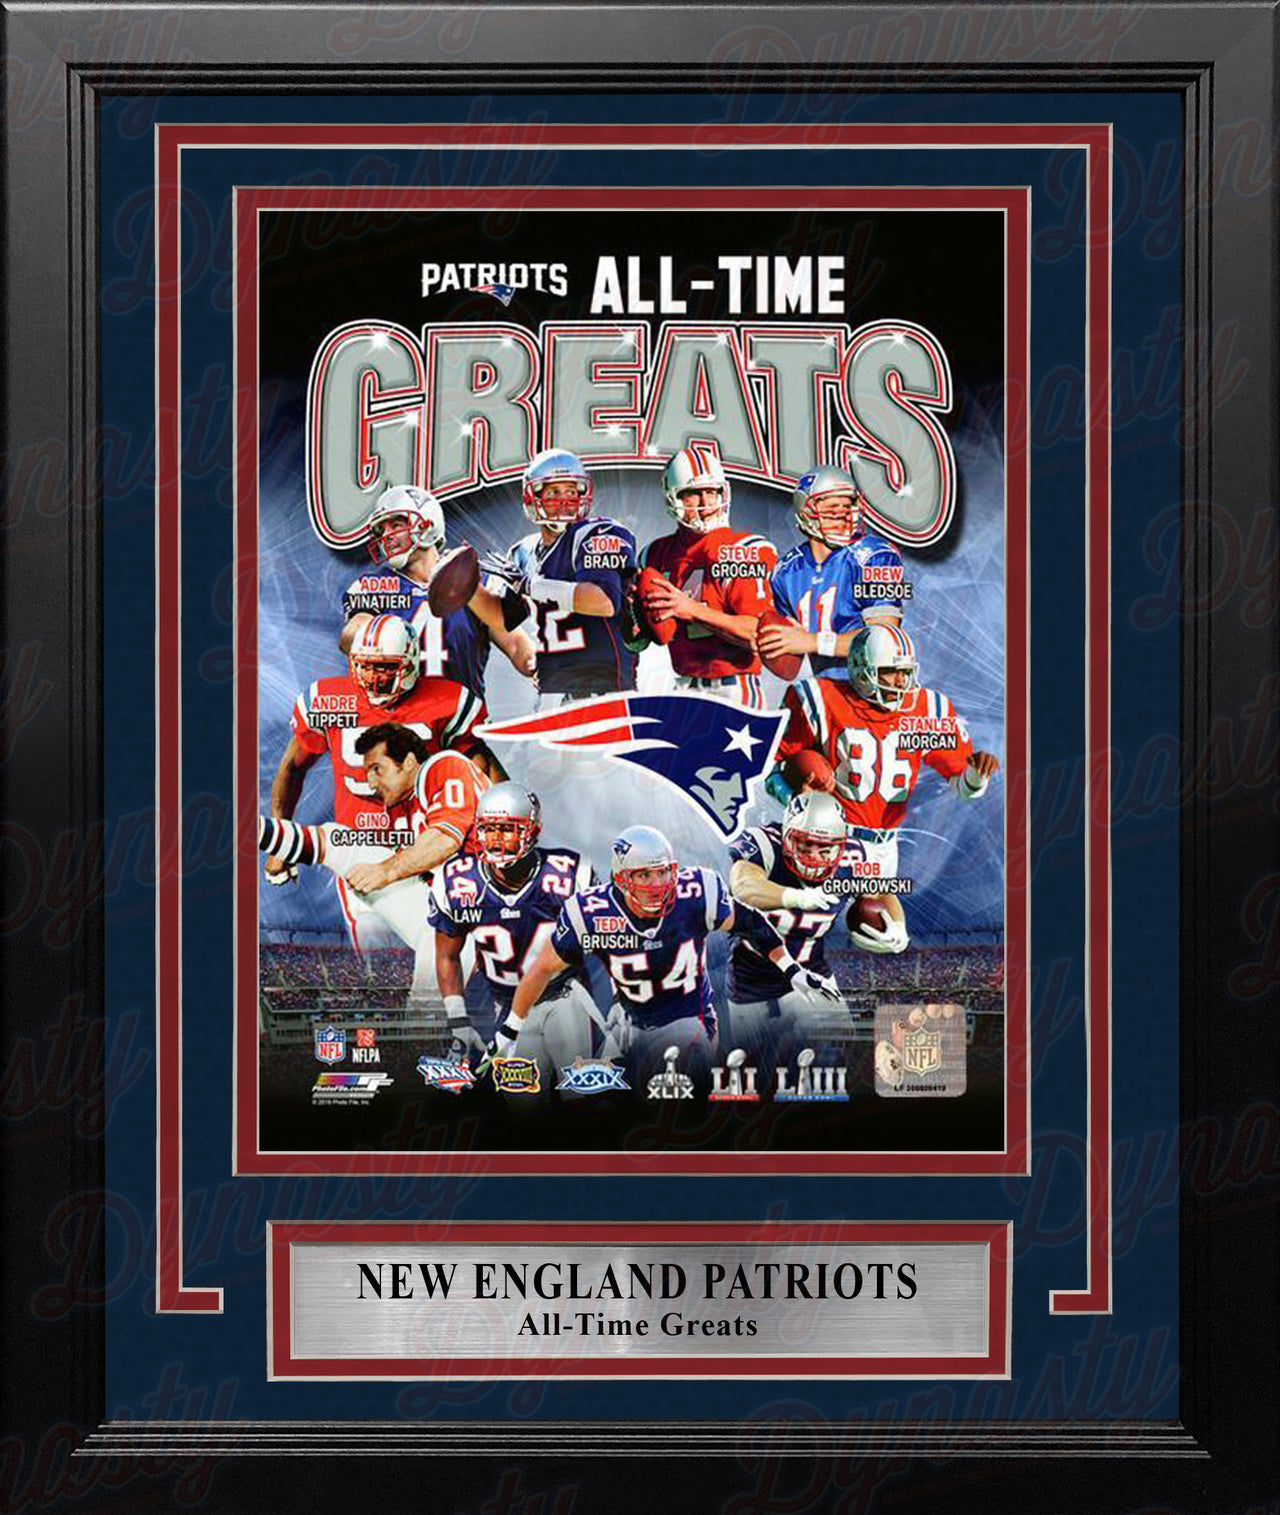 New England Patriots All-Time Greats NFL Football 8" x 10" Framed and Matted Photo - Dynasty Sports & Framing 